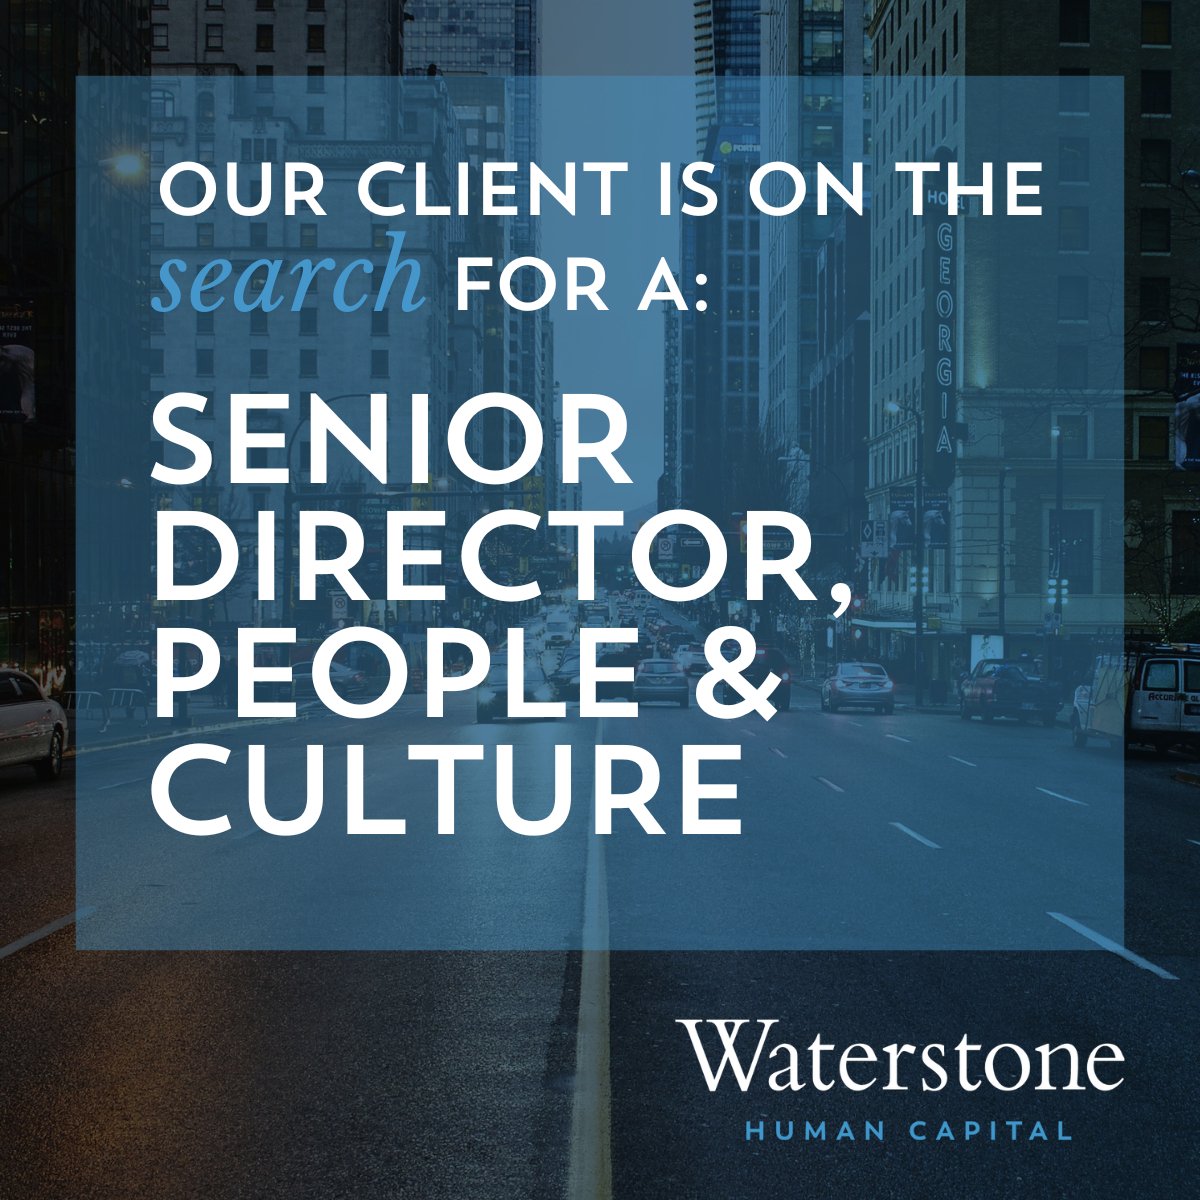 We're leading the search for a Sr Director, People and Culture, for our client.  If you're a passionate people leader and have led teams specialised in labor relations and high-volume talent acquisition, this could be for you! waterstonehc.com/opportunity/se…
#hiring #executivesearch